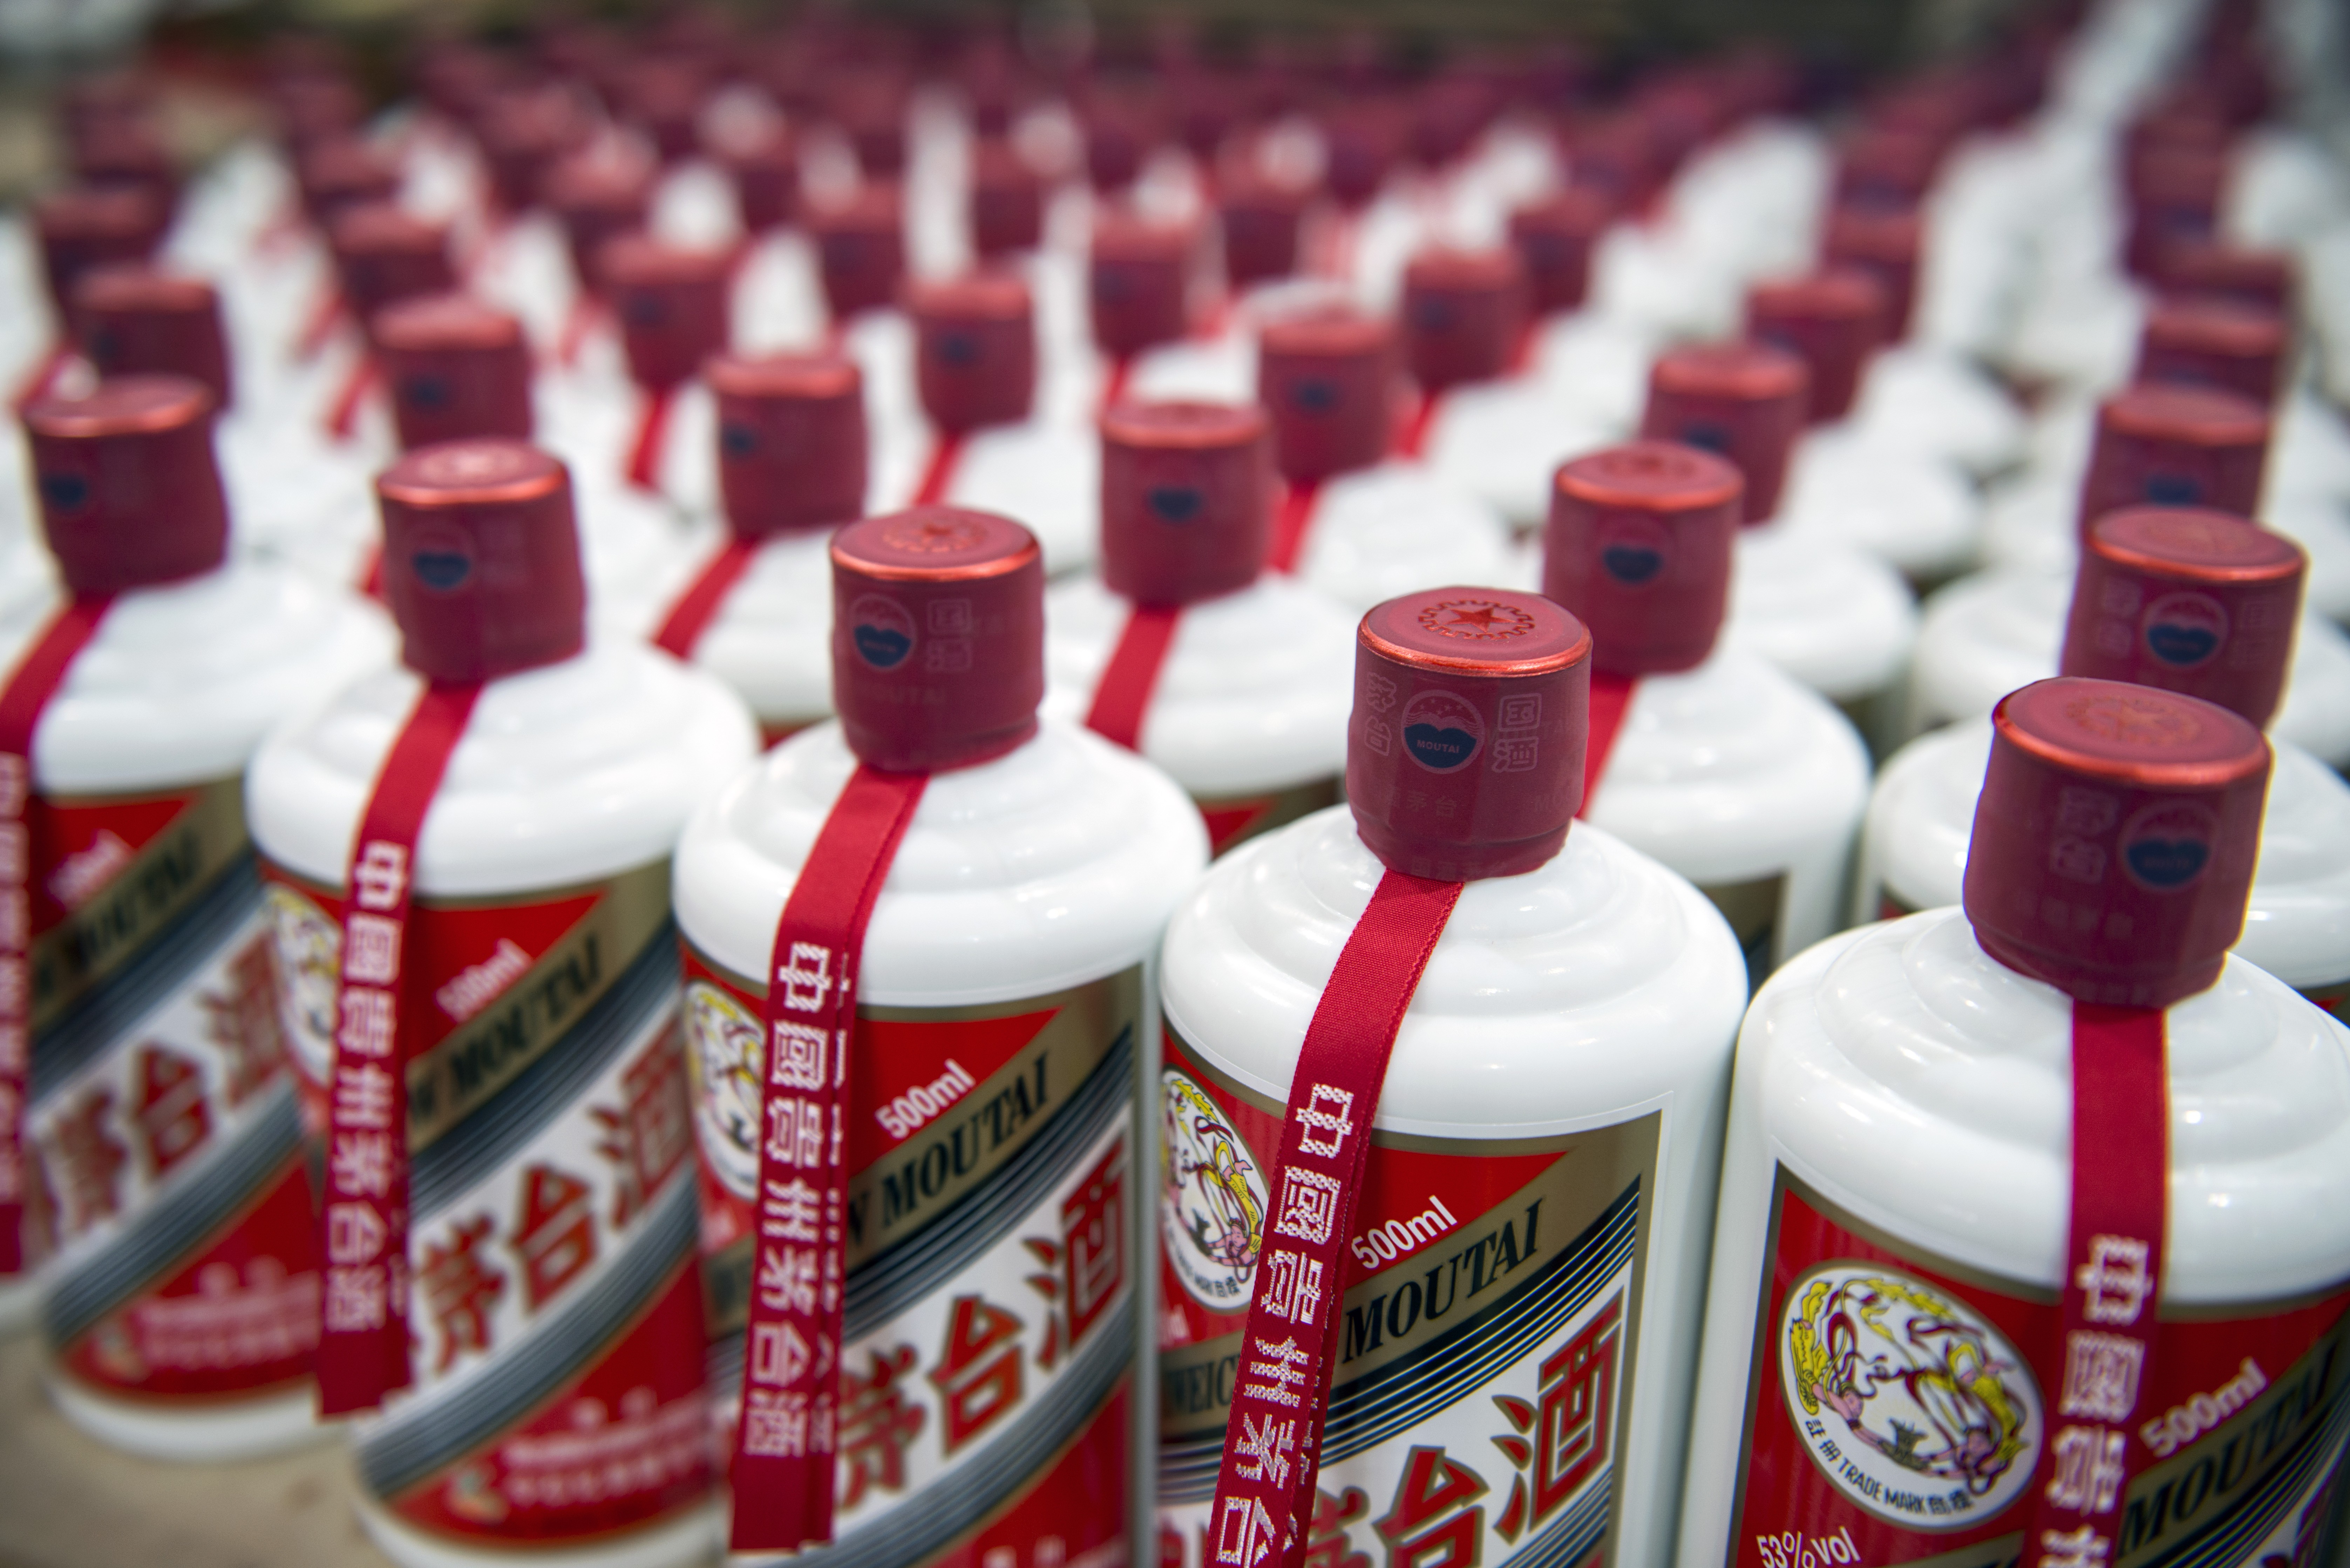 Breaching a cordon of Chinese soldiers, we see inside the distillery of Kweichow Moutai, top producer of China’s most famous liquor